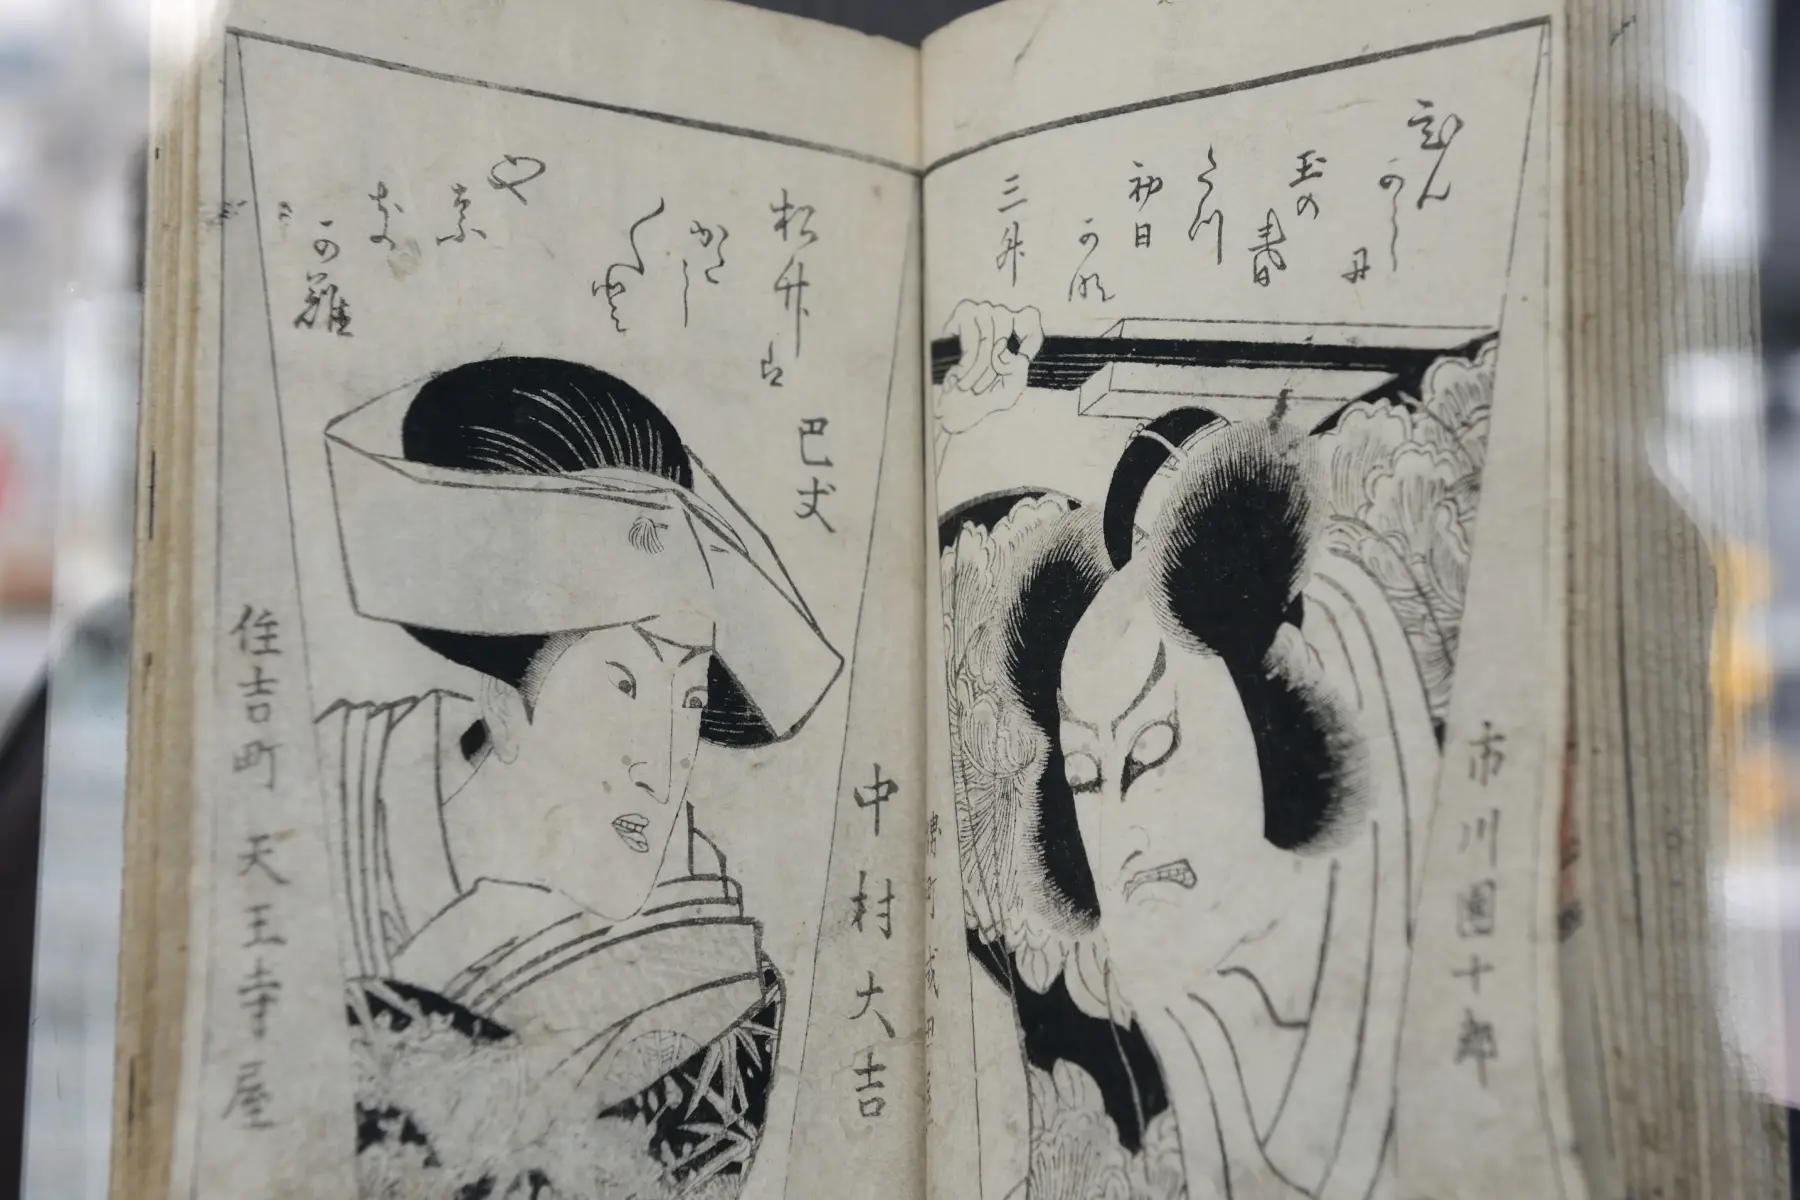 Pages with Japanese drawings - Kabuki theatre